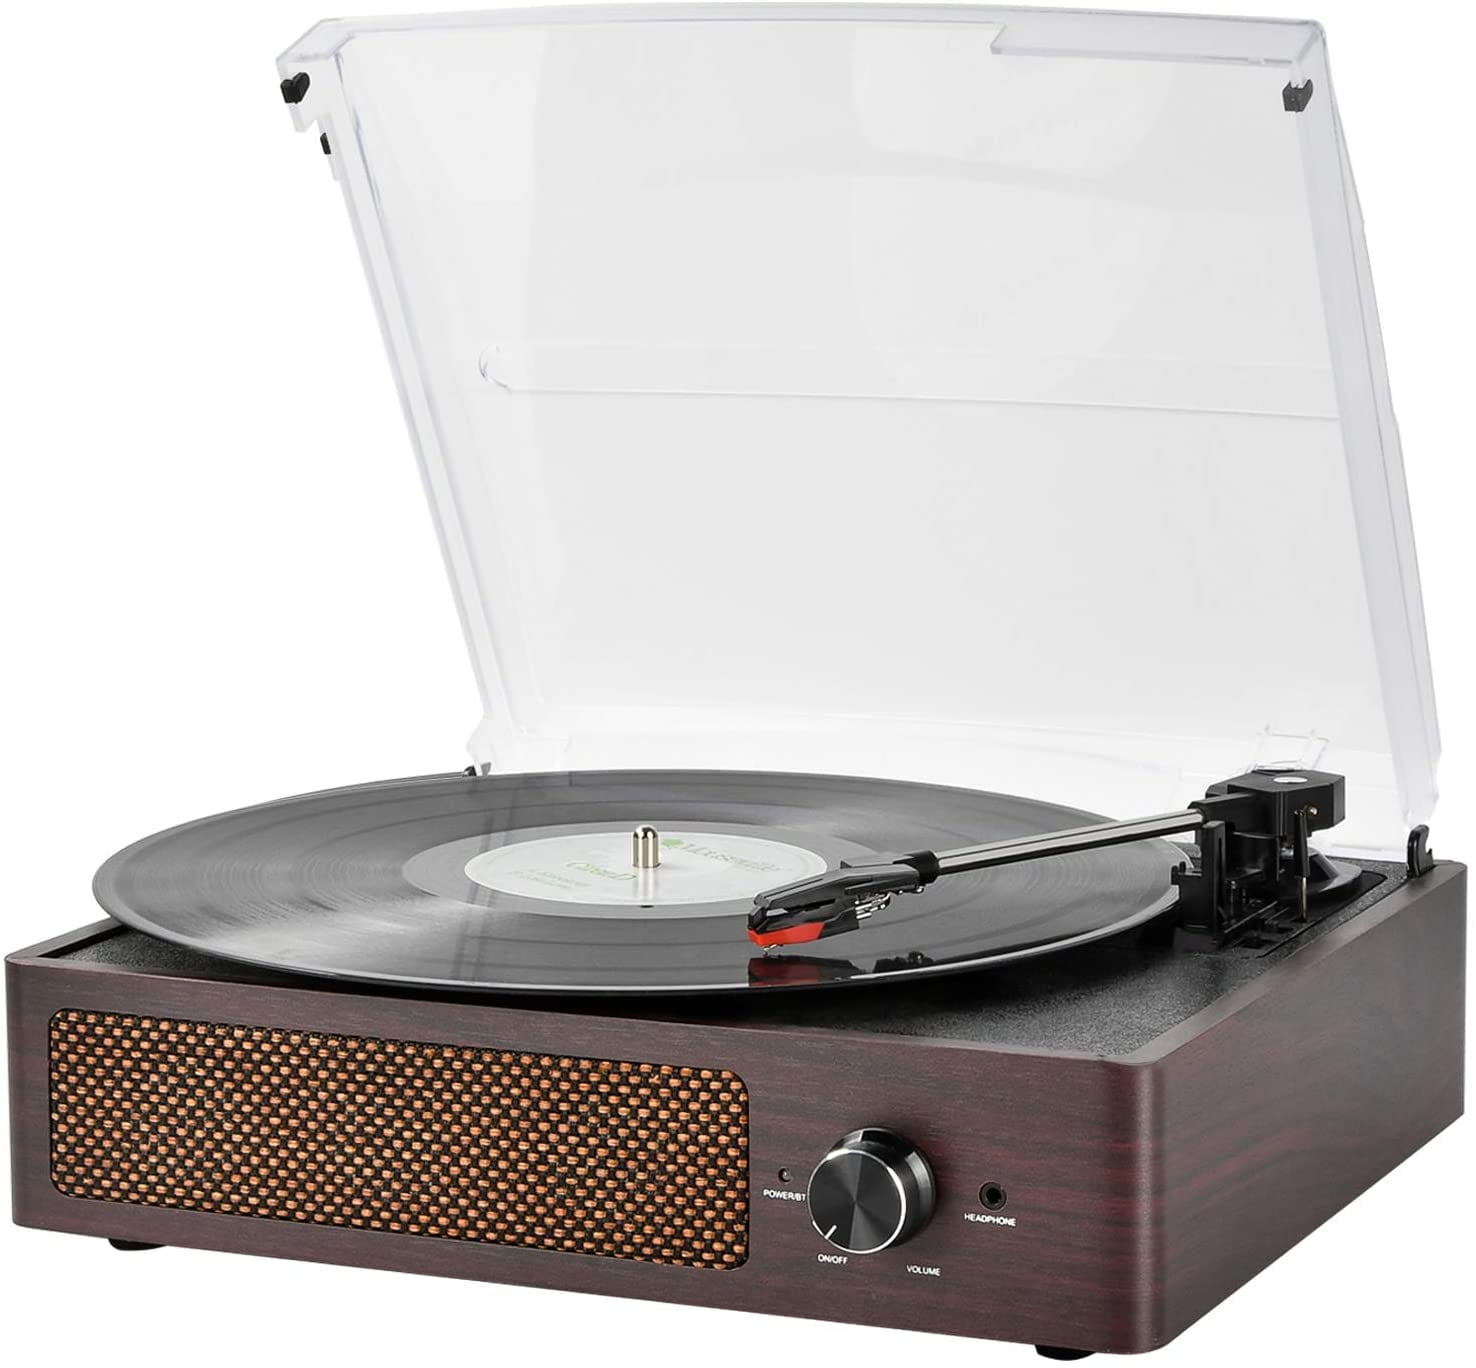 Record Player with Speakers Bluetooth Turntable with FM Stereo Radio Belt-Driven Vinyl Record Player 3-Speed Vintage Portable LP Phonograph Player 